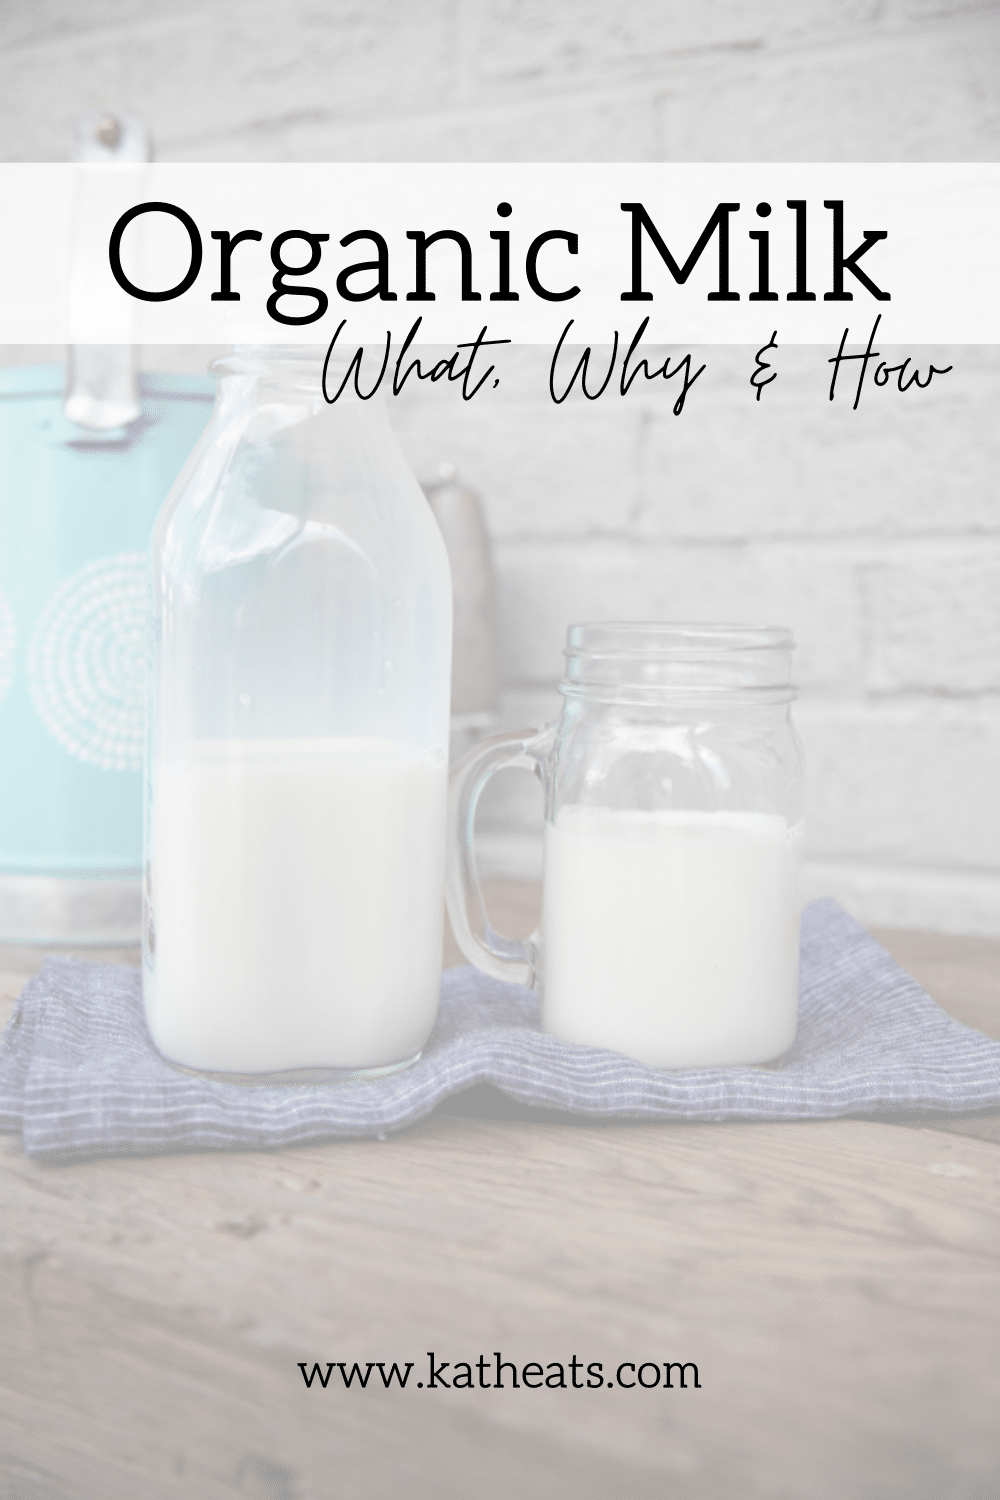 Whole milk in clear glass jars with text overlay.